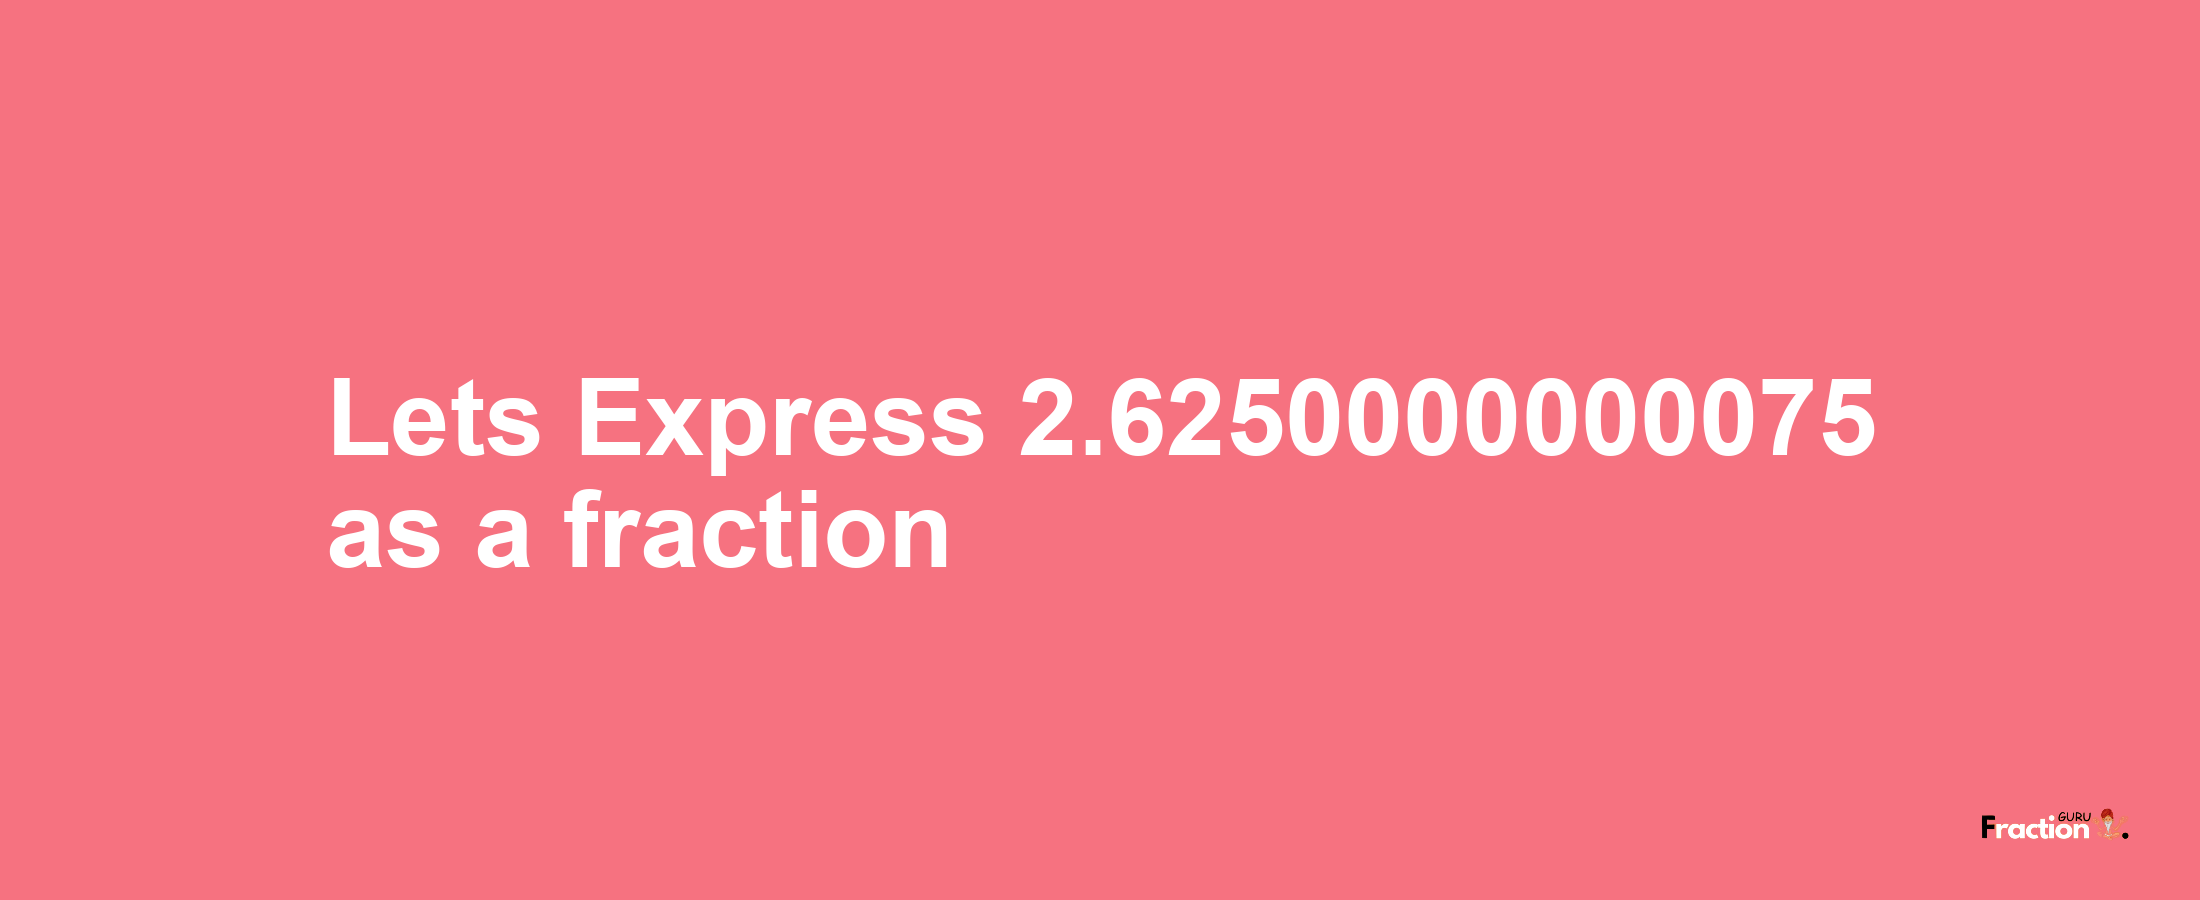 Lets Express 2.6250000000075 as afraction